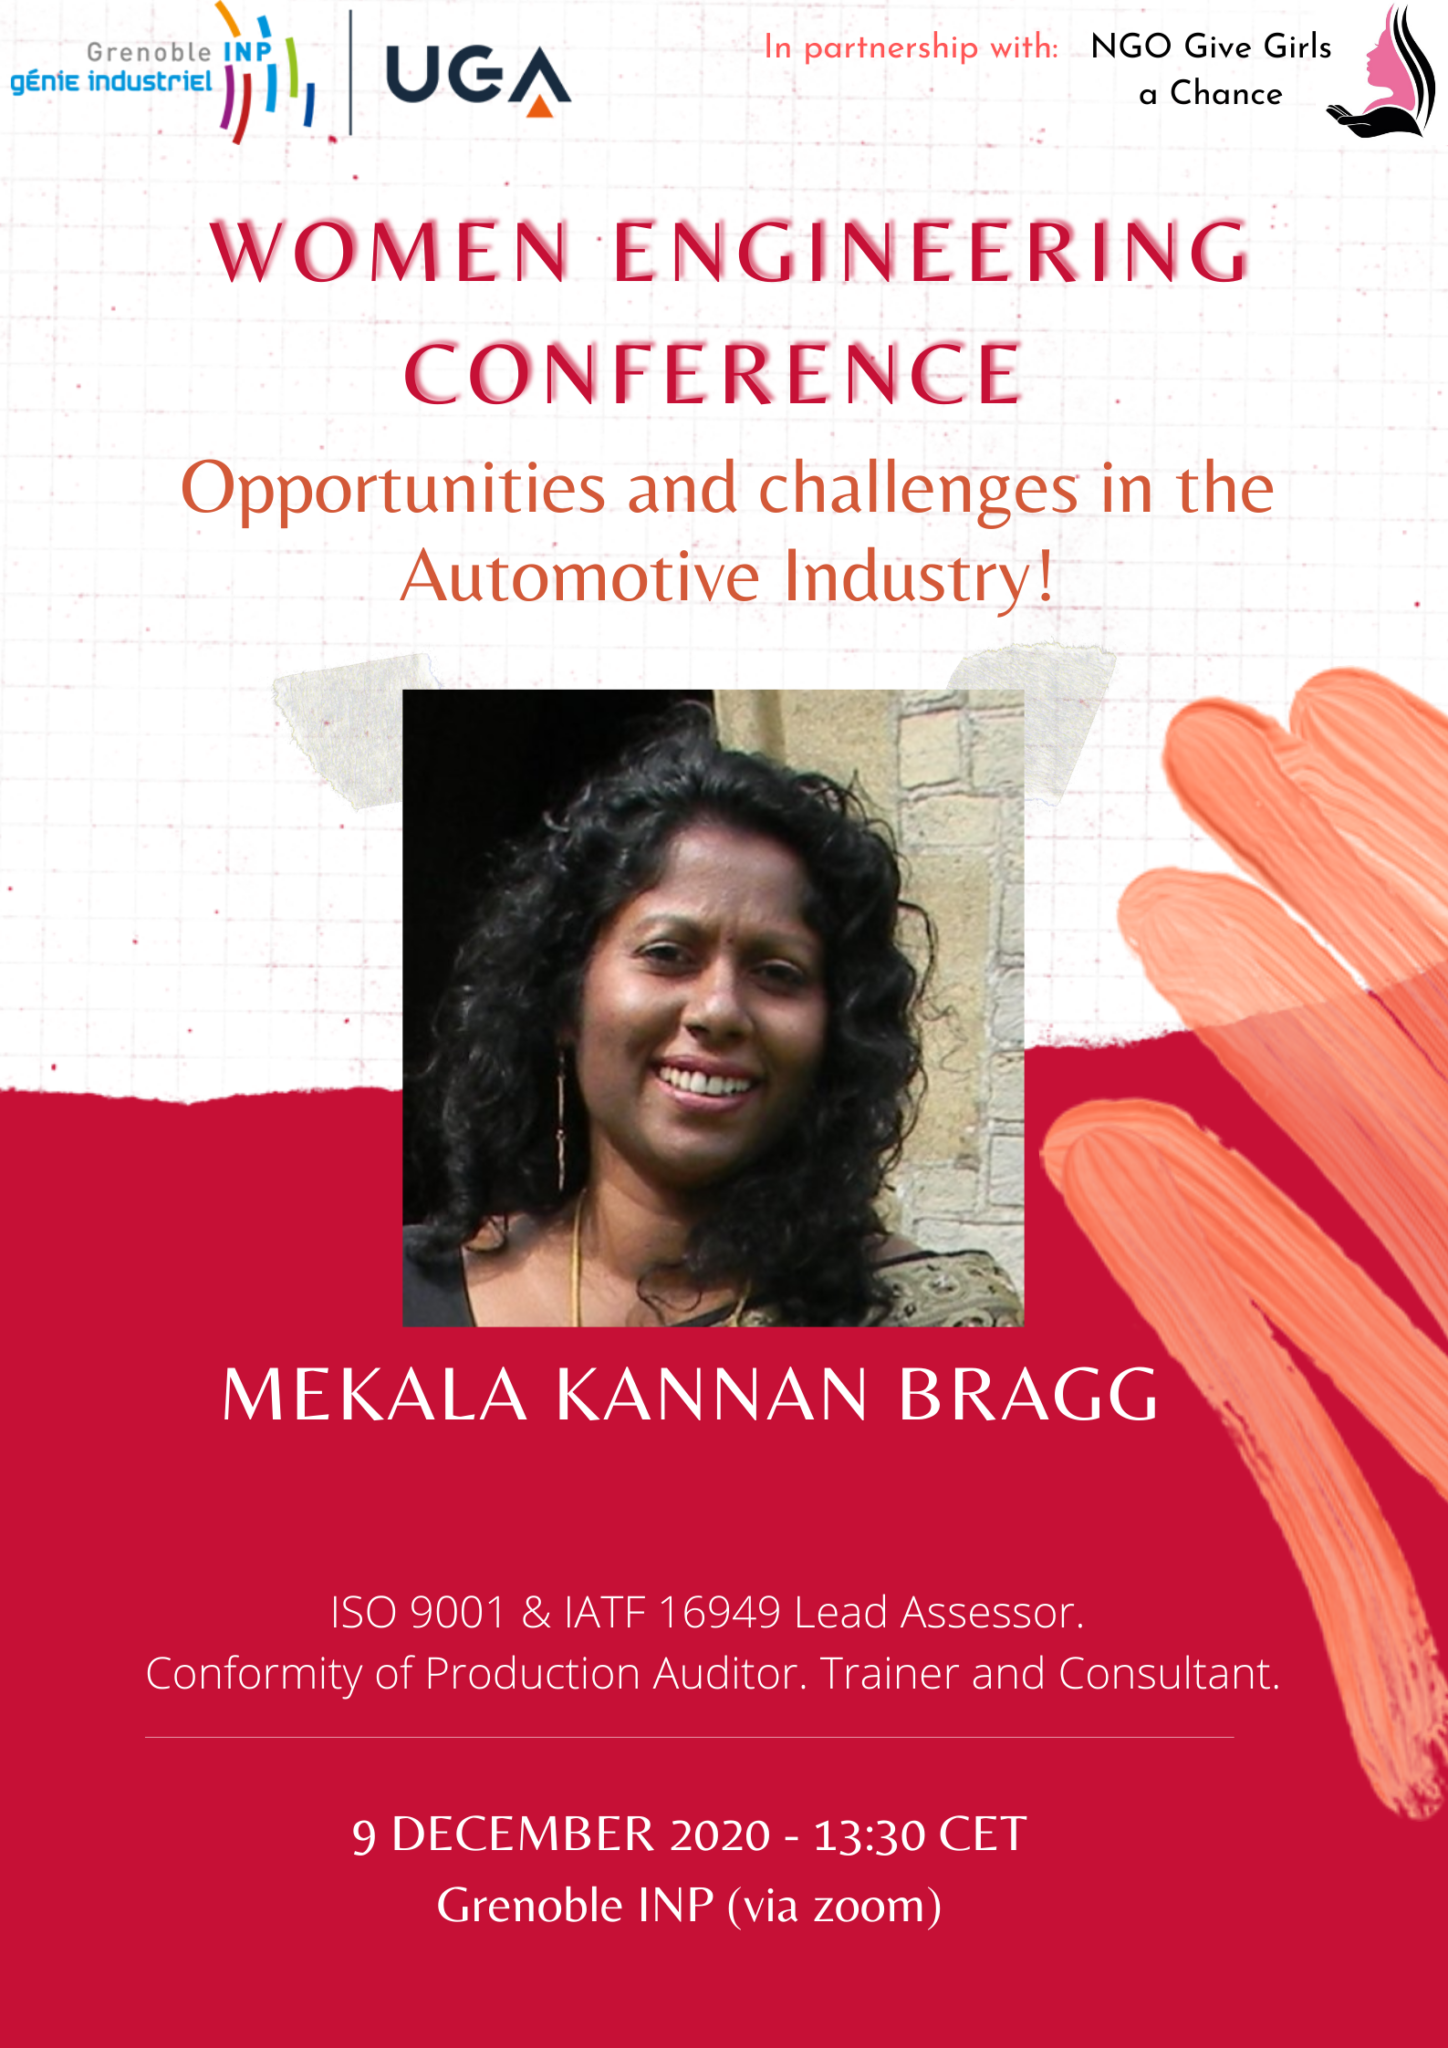 The Women in Engineering Conference Kanbra Quality Ltd